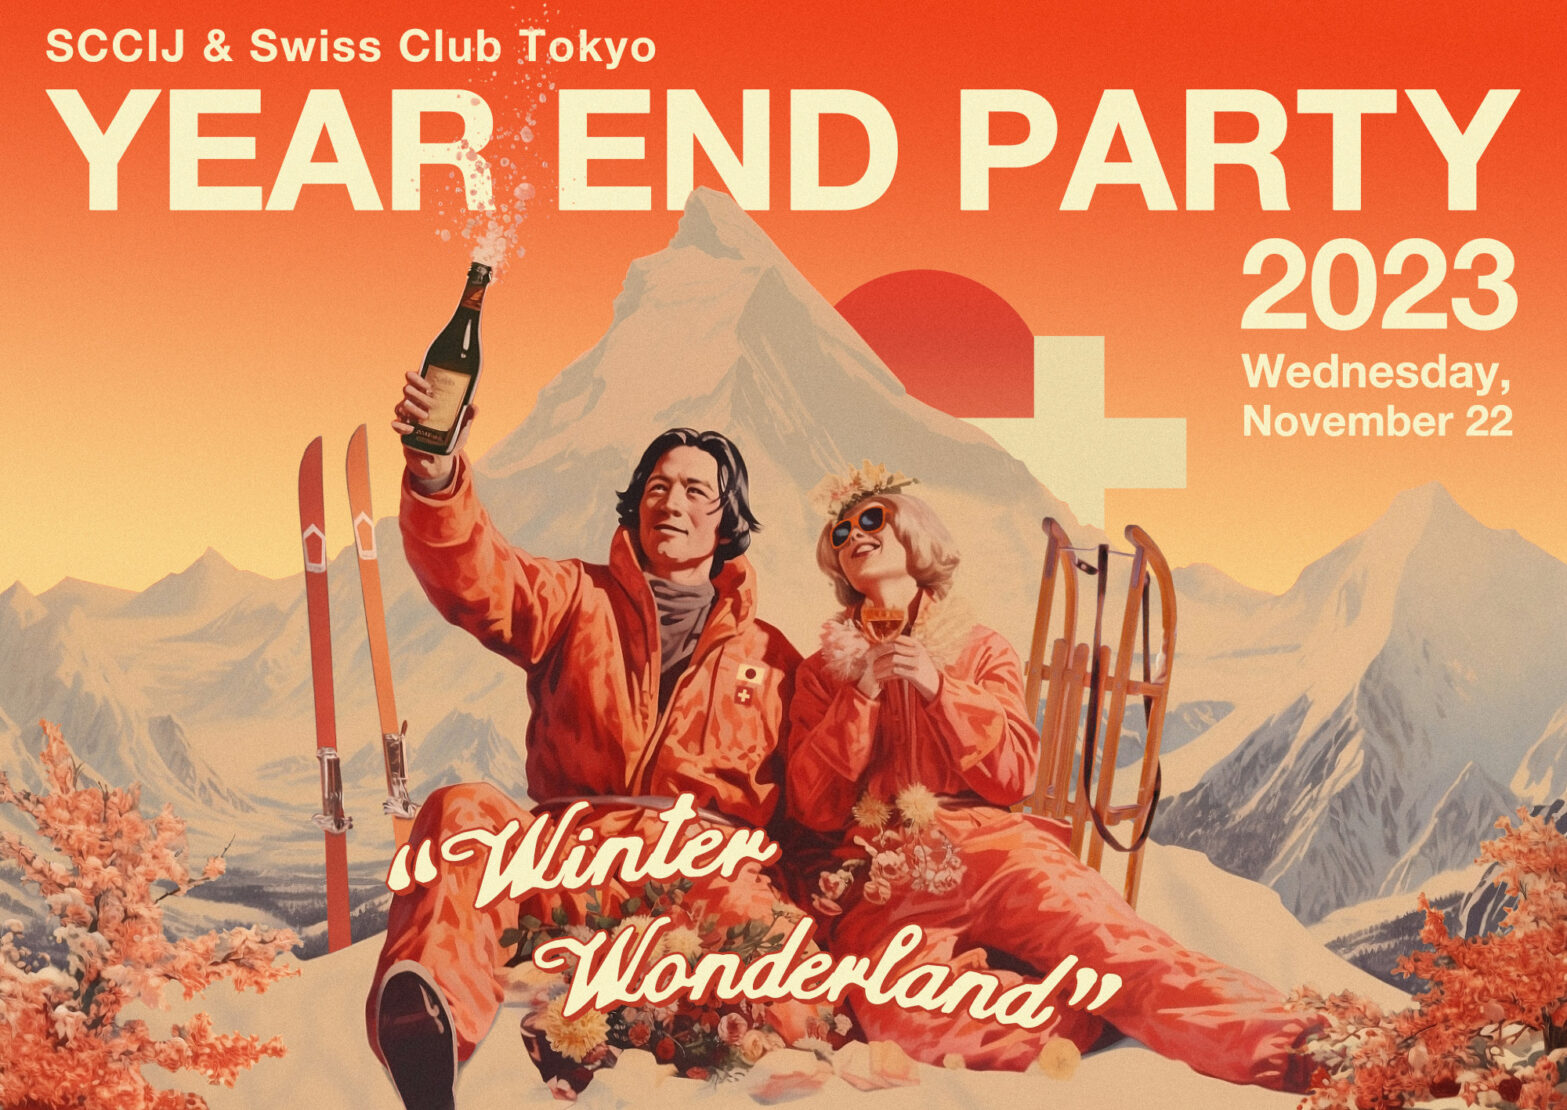 SCCIJ & Swiss Club Tokyo Year End Party 2023